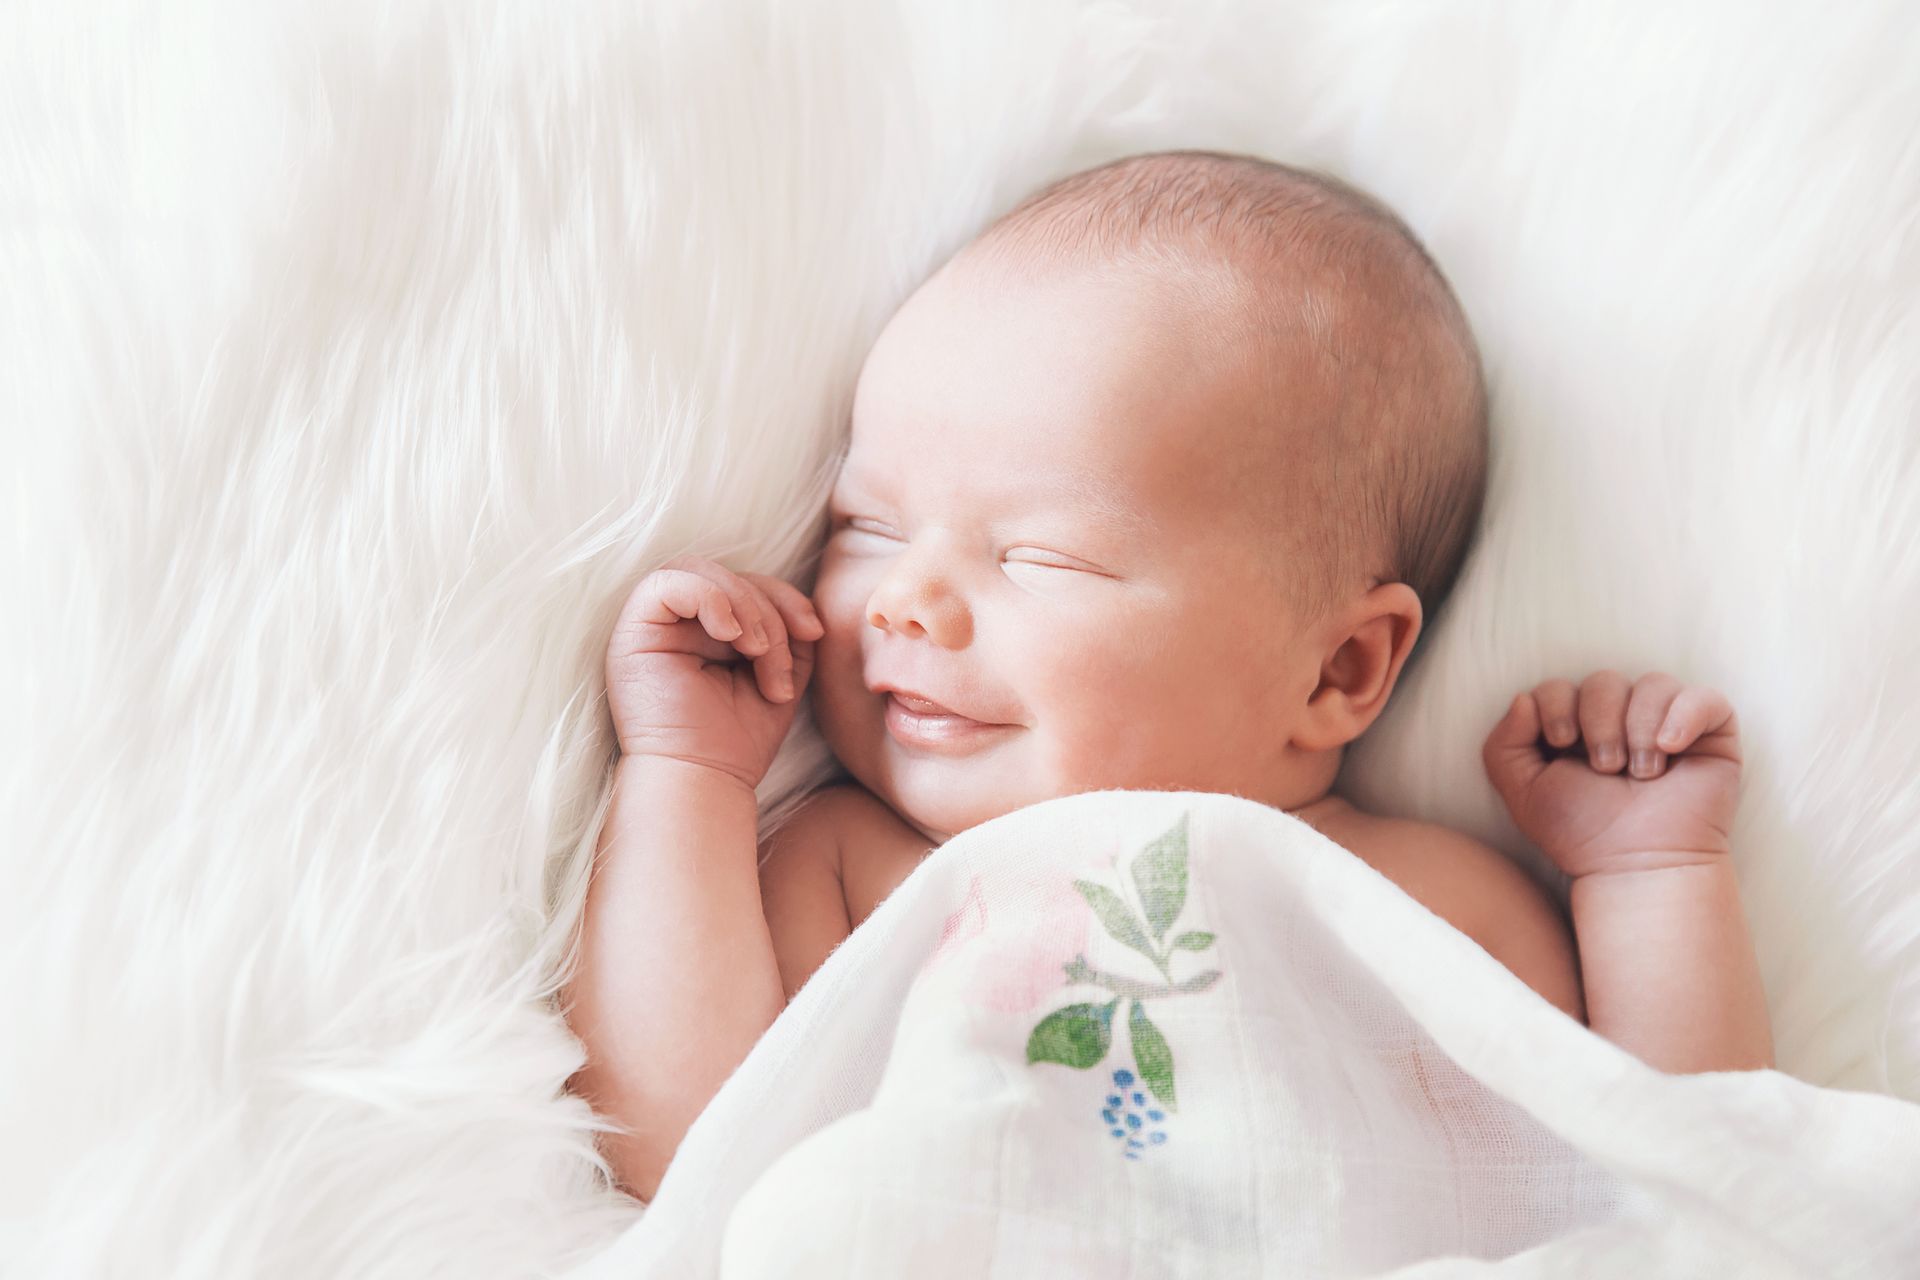 Smiling newborn baby snuggled up in white blankets